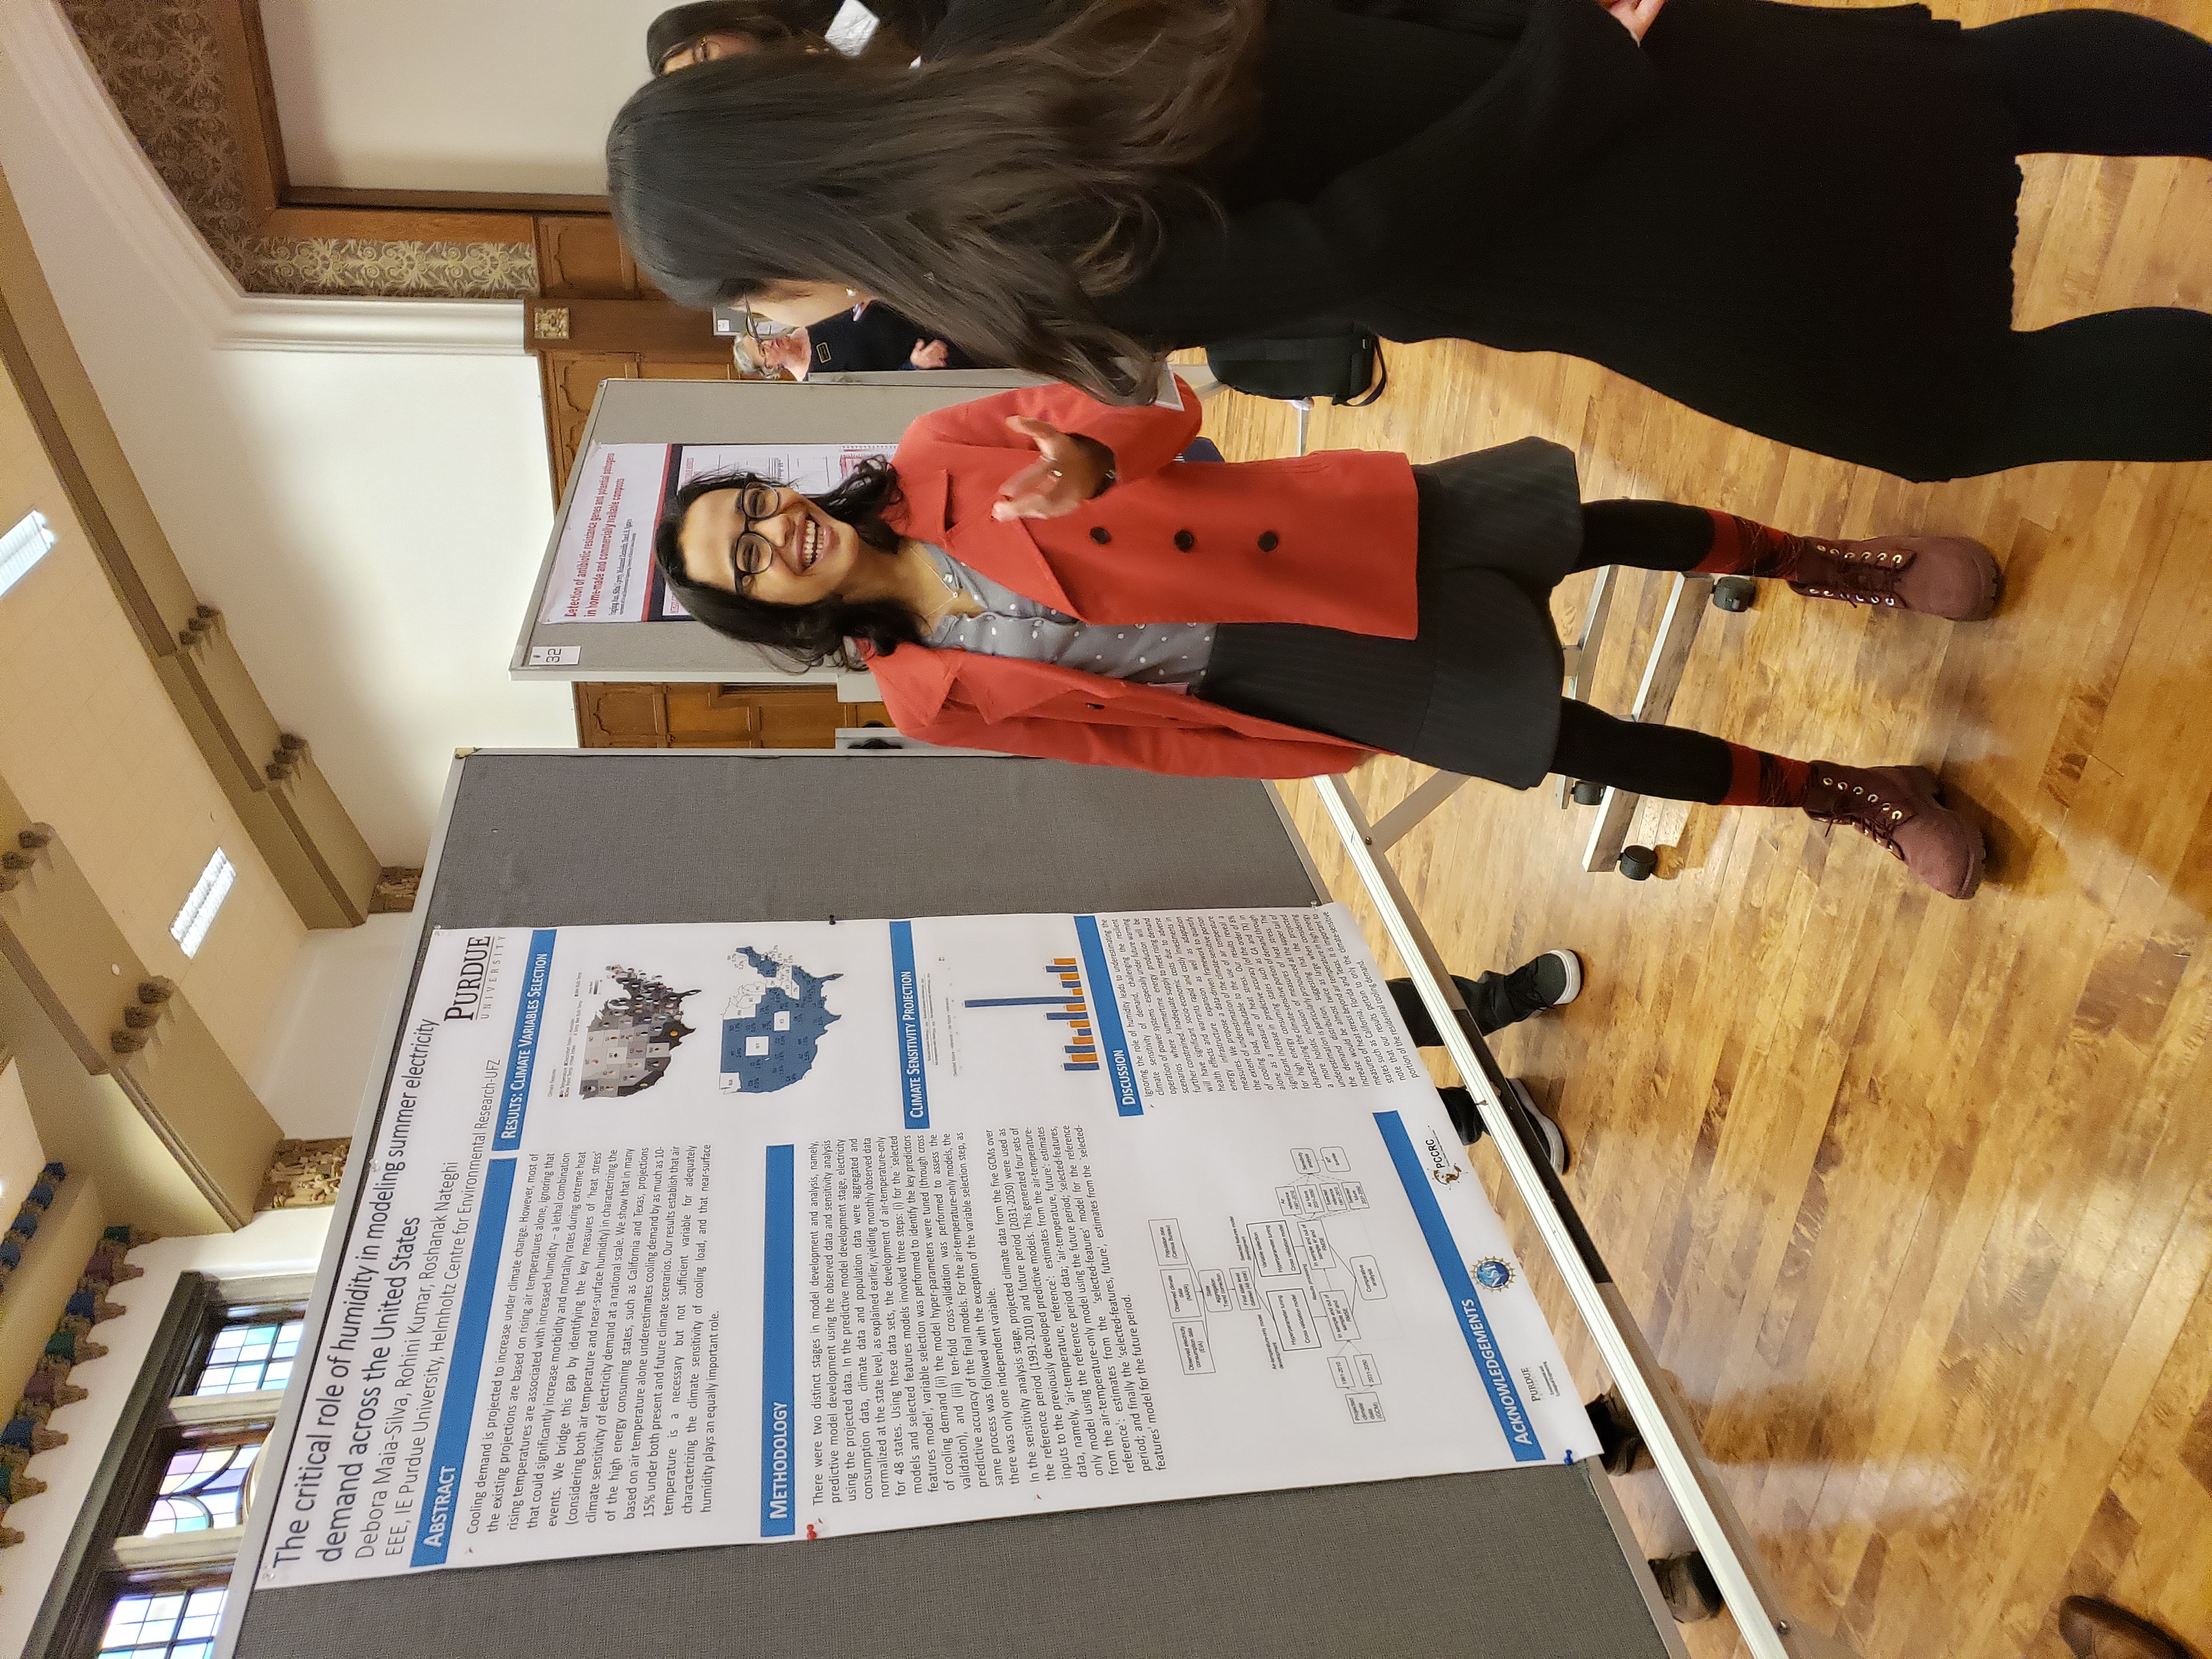 Debs Maia Silva presenting a research poster